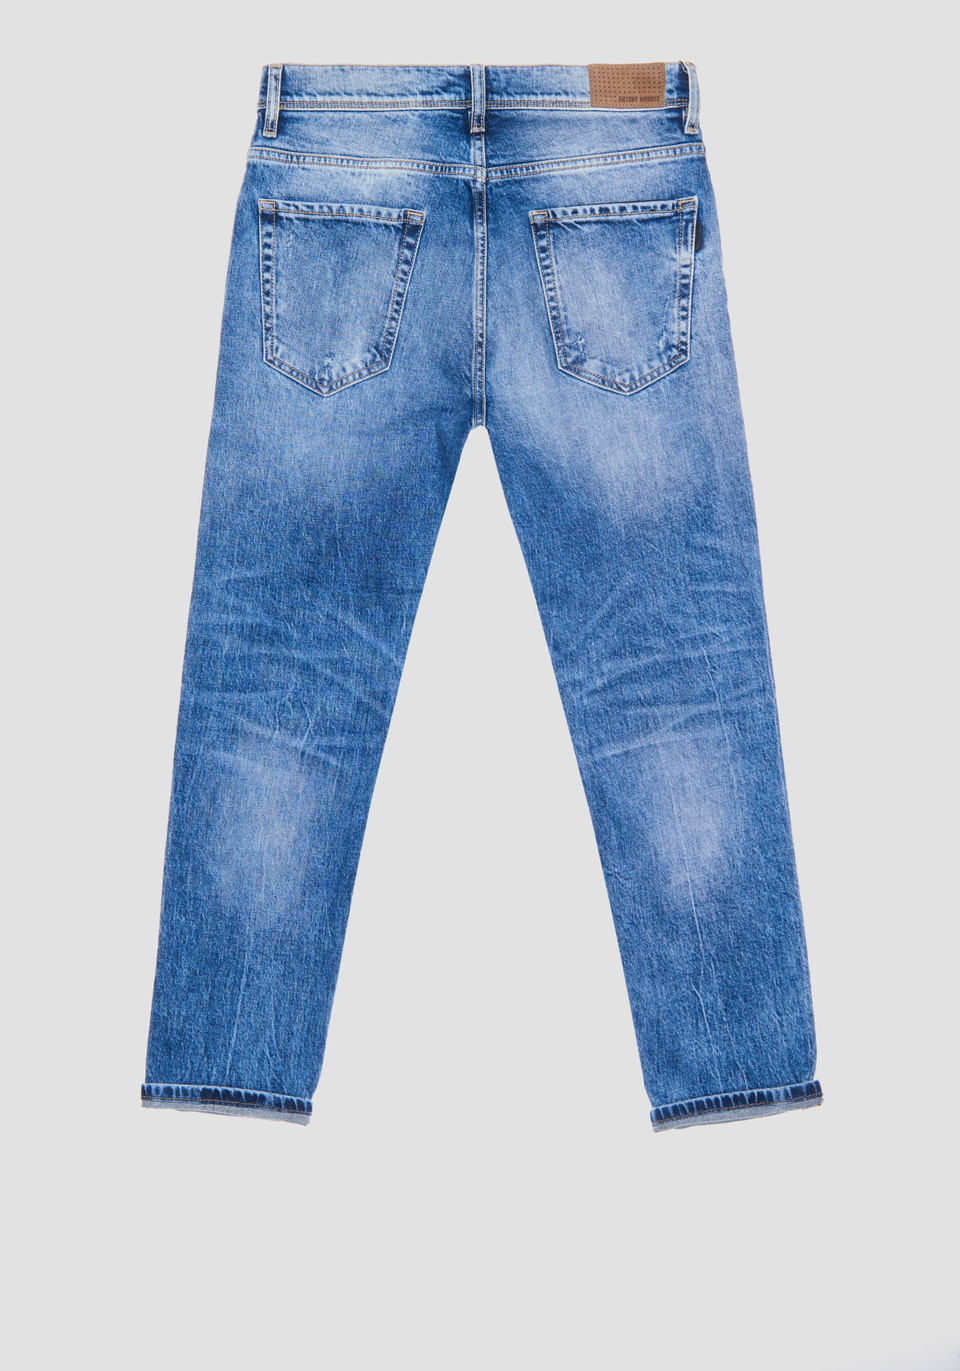 "ARGON" SLIM FIT ANKLE JEANS IN COMFORT DENIM WITH MEDIUM WASH AND ABRASIONS - Antony Morato Online Shop